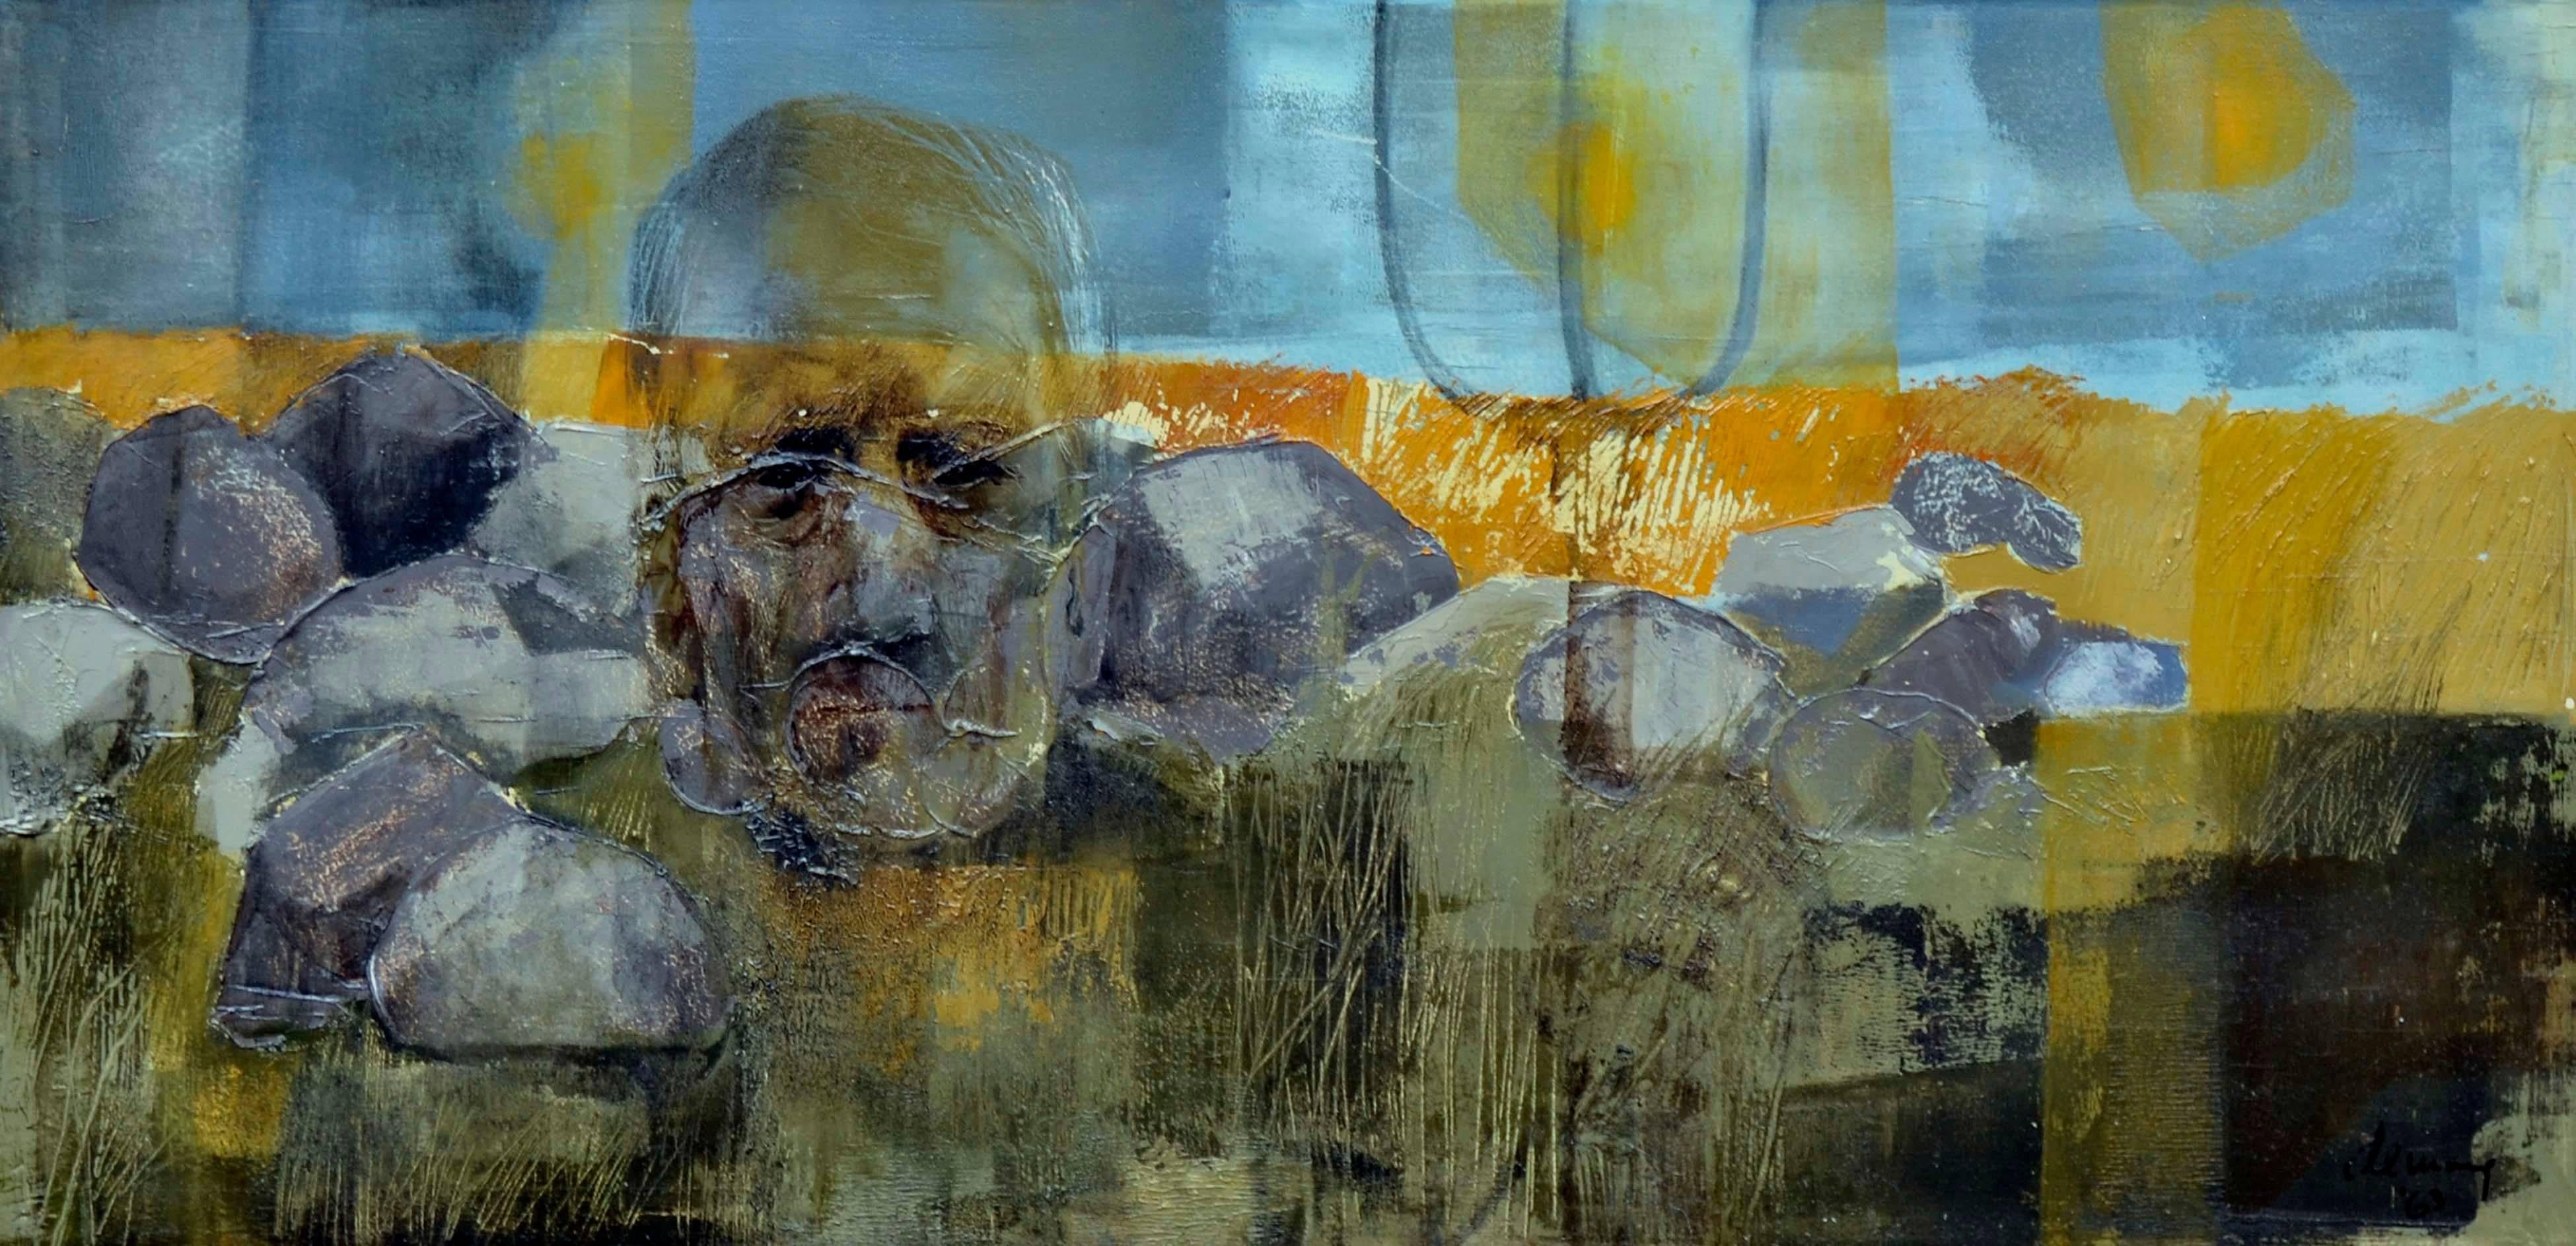 Homage to Asa, American Gothic Figurative Abstract  - Painting by Phyllis Demong